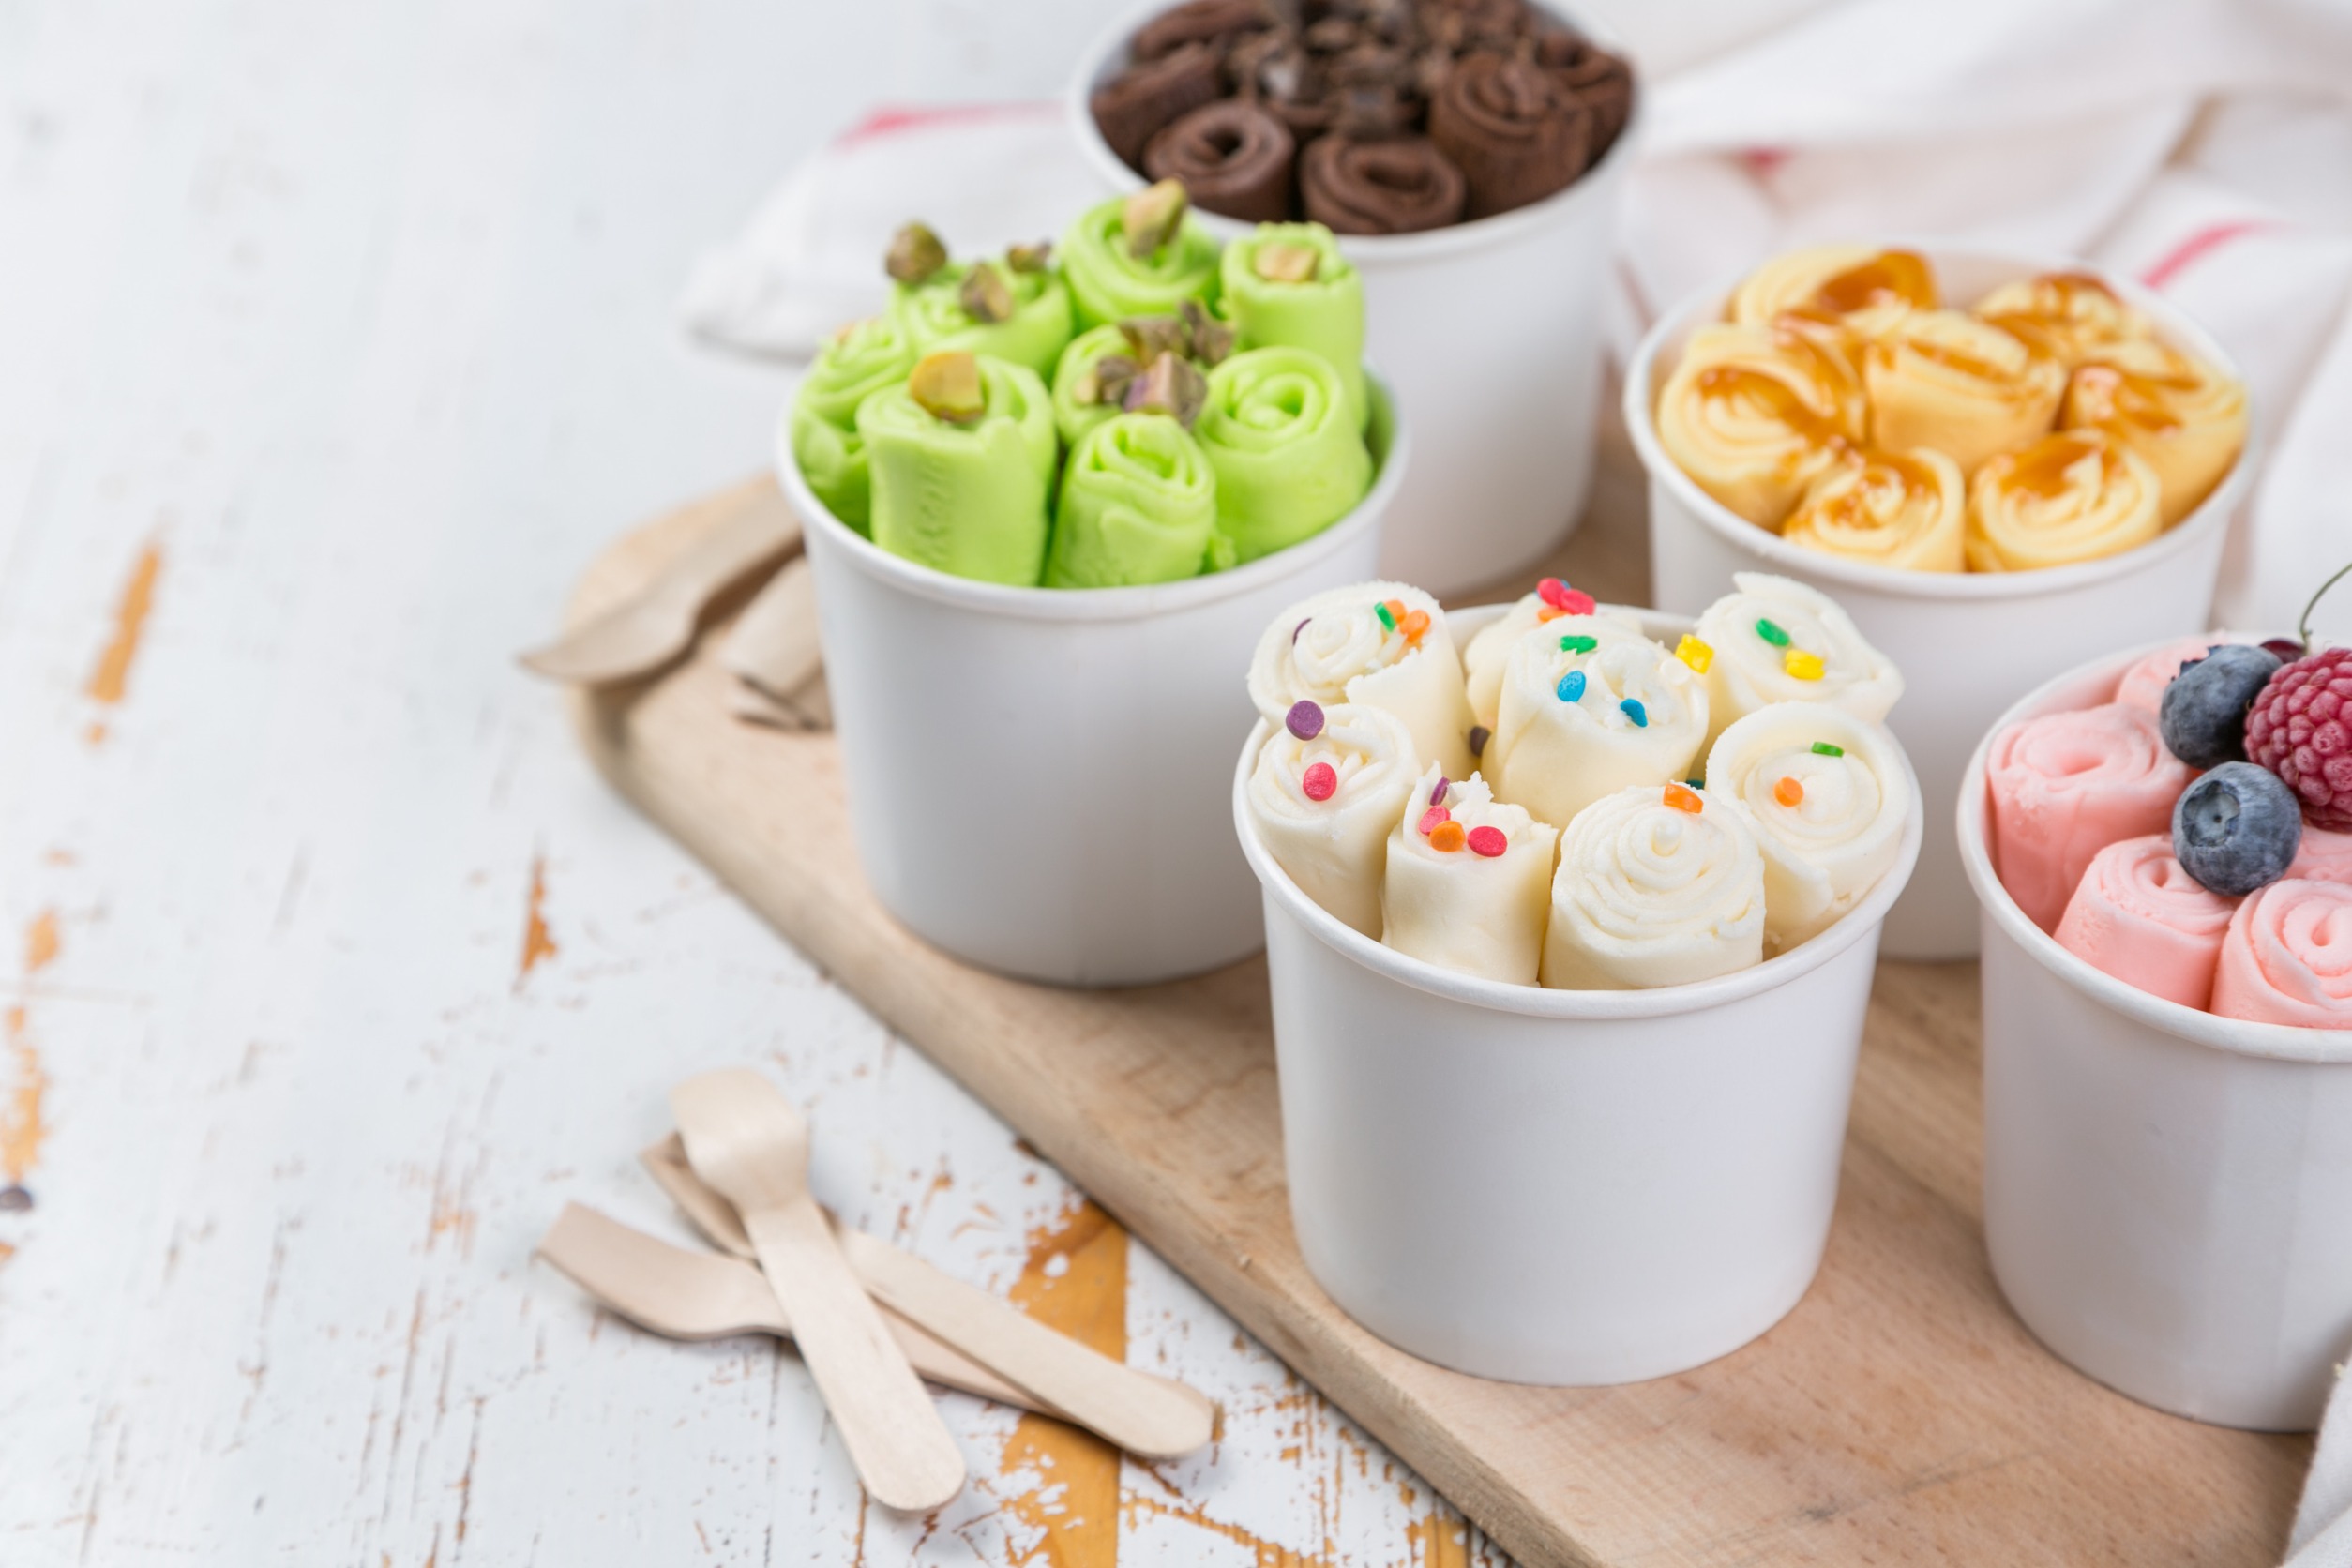 rolled ice cream bowls on a platter on a wooden table with wooden spoons